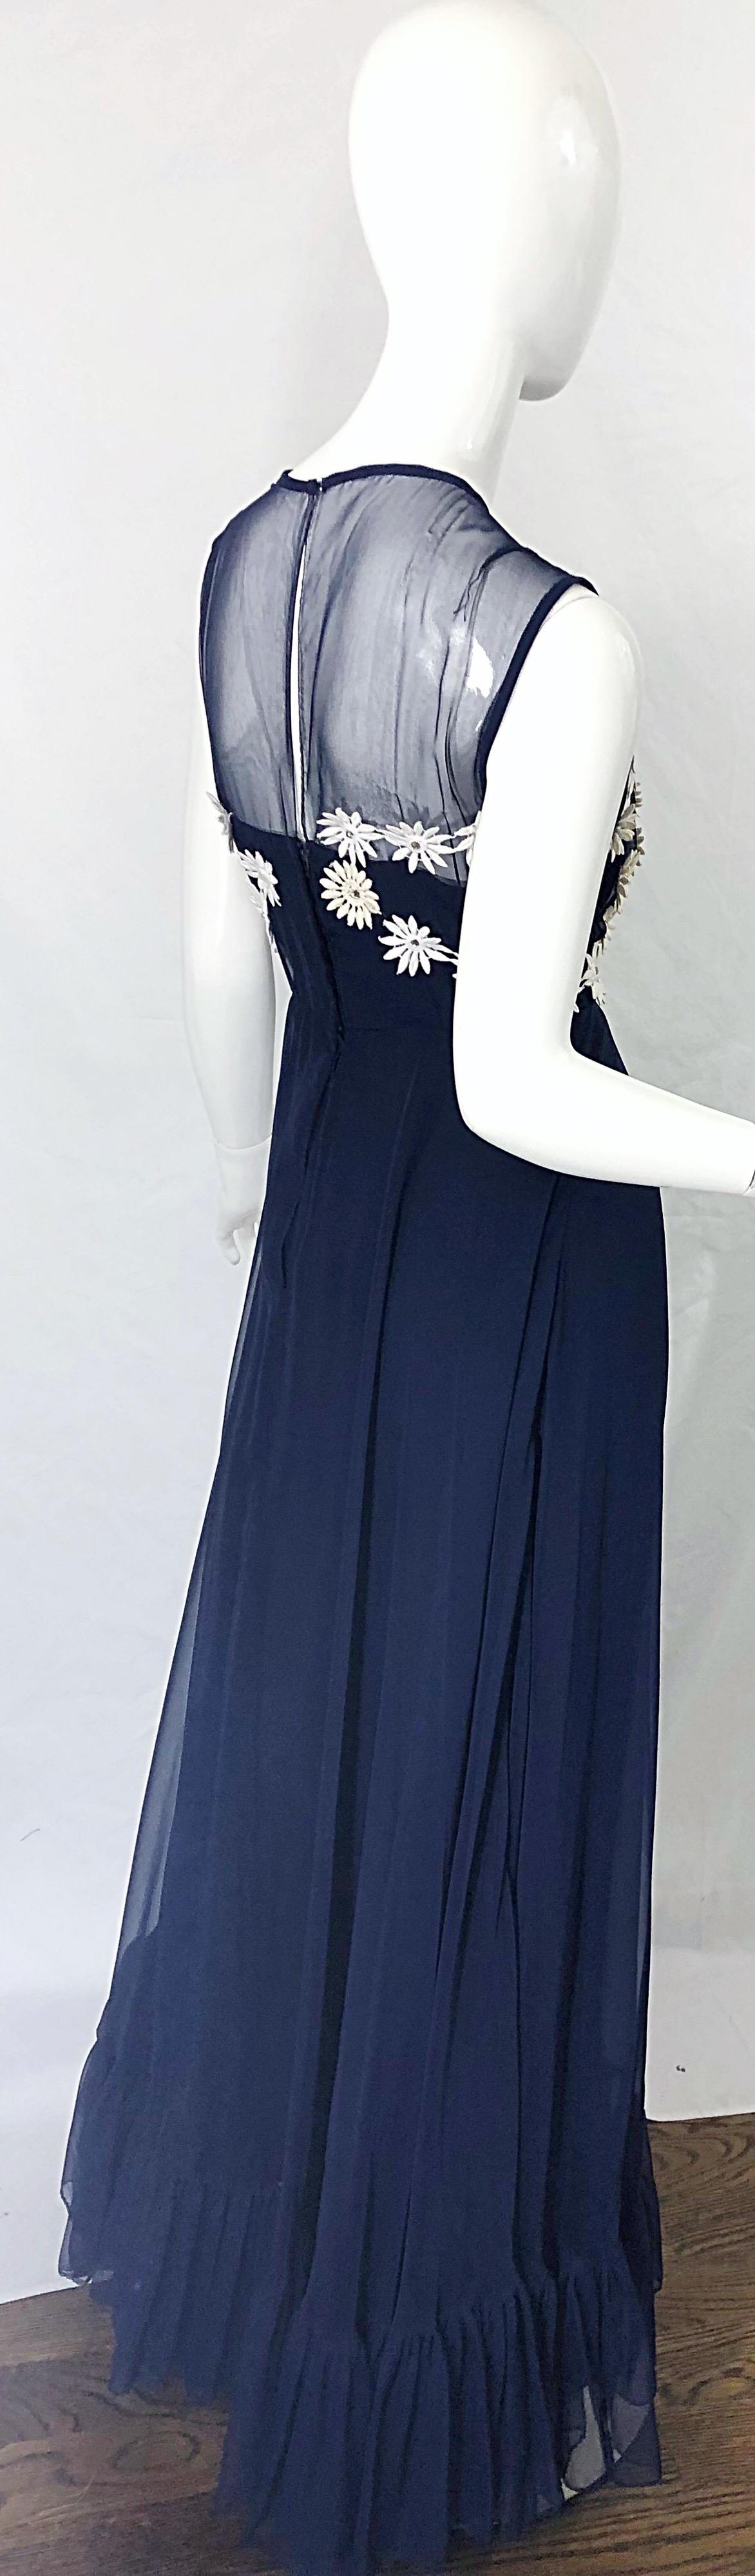 1960s Navy Blue Chiffon White Rhinestone Flowers Vintage 60s Gown Maxi Dress For Sale 4